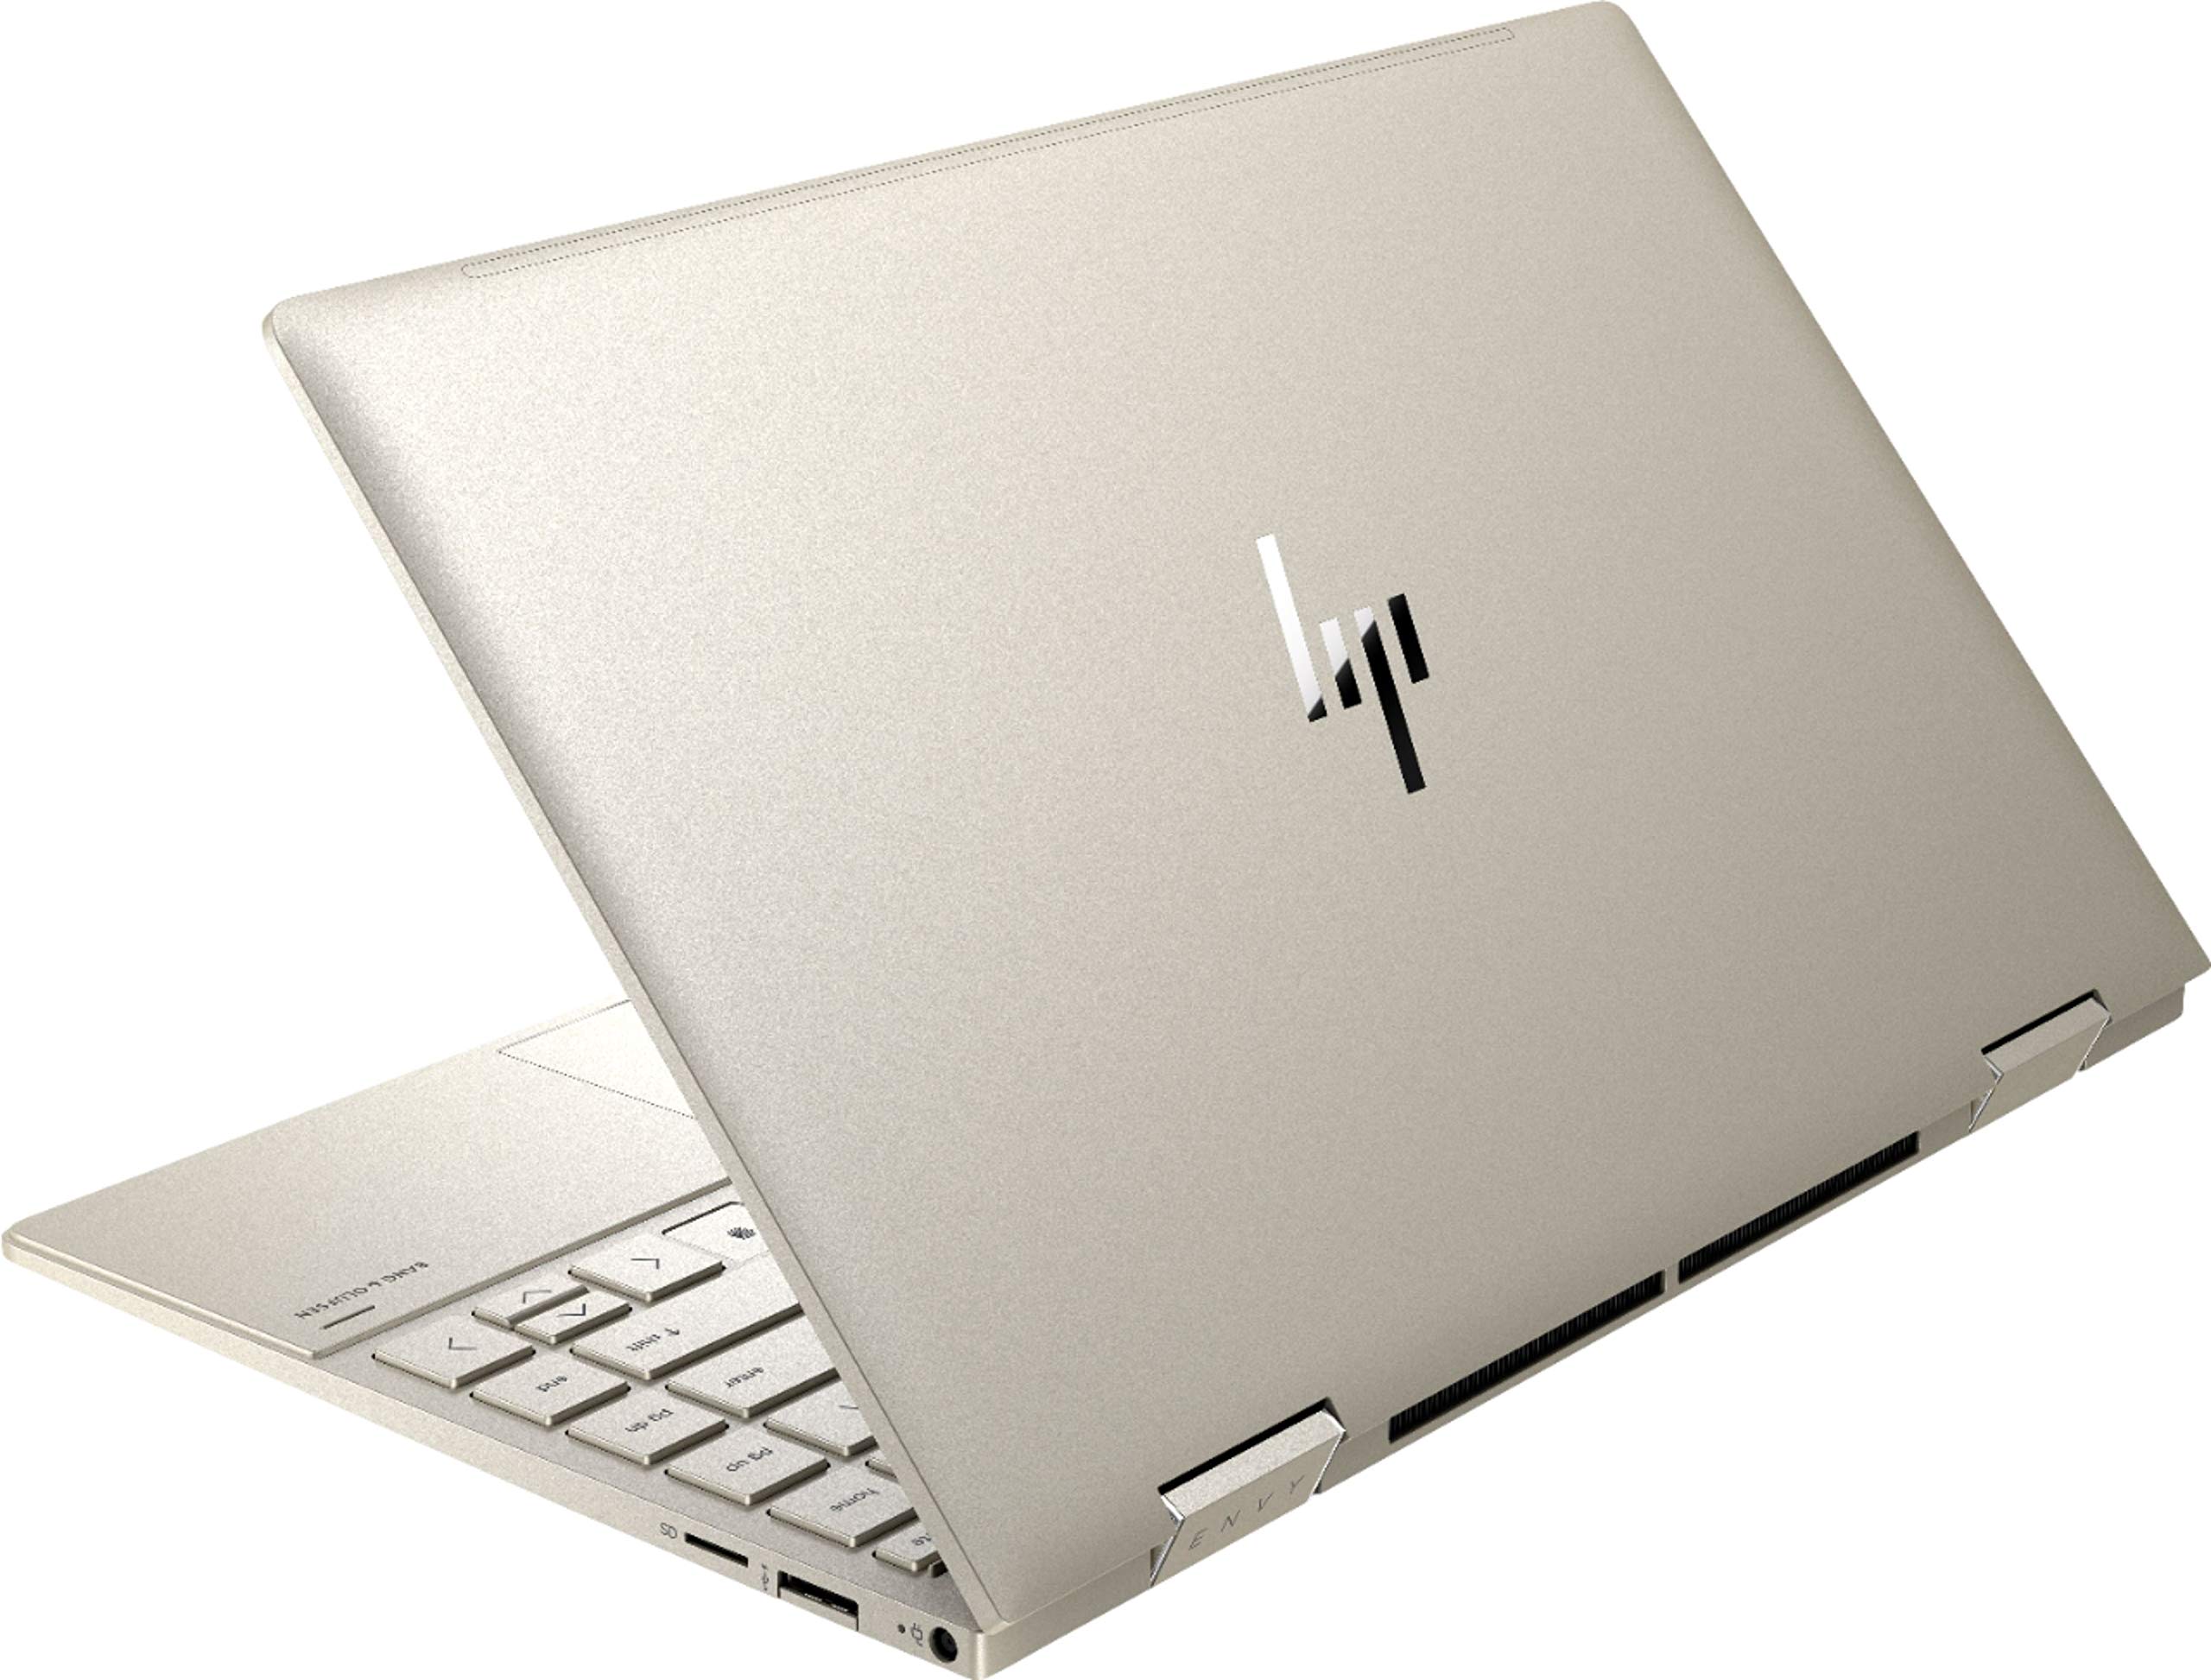 HP - Envy 2-in-1 13inch Touch-Screen Laptop - Intel Evo Platform Core i5-1135G7 - 8GB Memory - 256GB SSD - Pale Gold - Backlit Keyboard -Fingerprint Reader -Thunderbolt - WiFi 6 13-13.99 inches